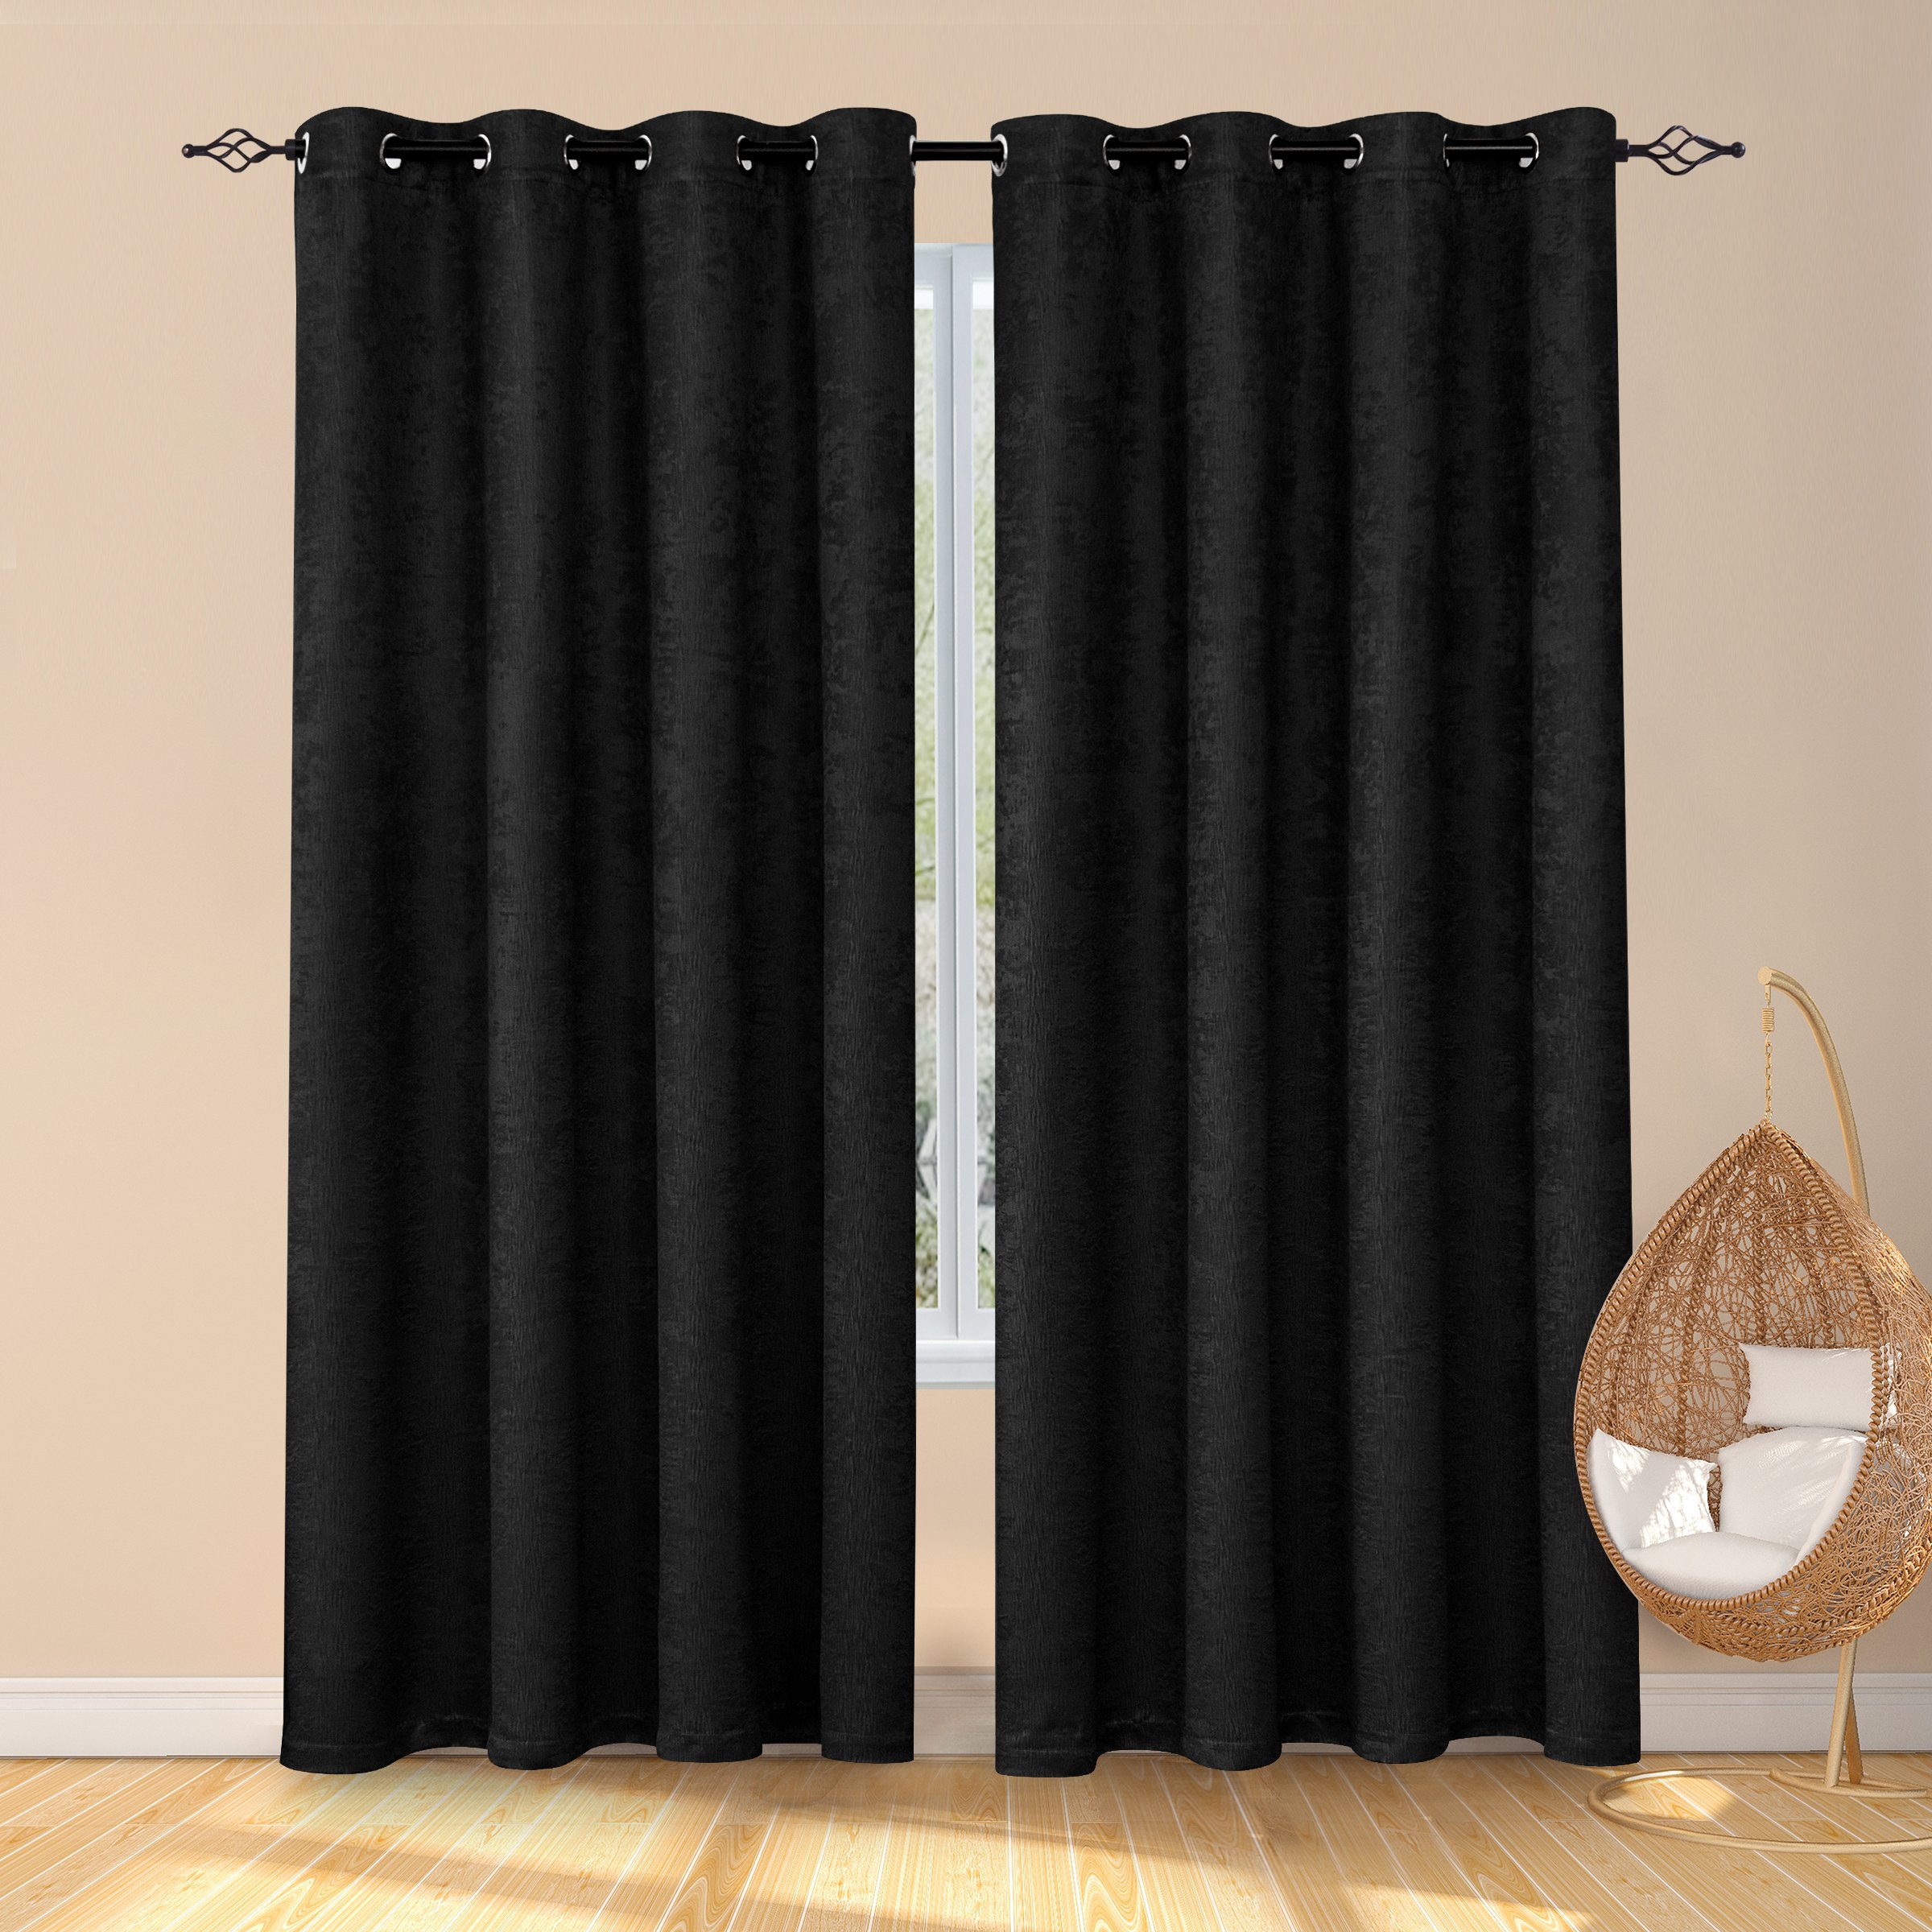 Subrtex Thermal Insulated Grommet Blackout Curtains for Bedroom, Set of 2 Panels, 53"×84", Black - image 1 of 5